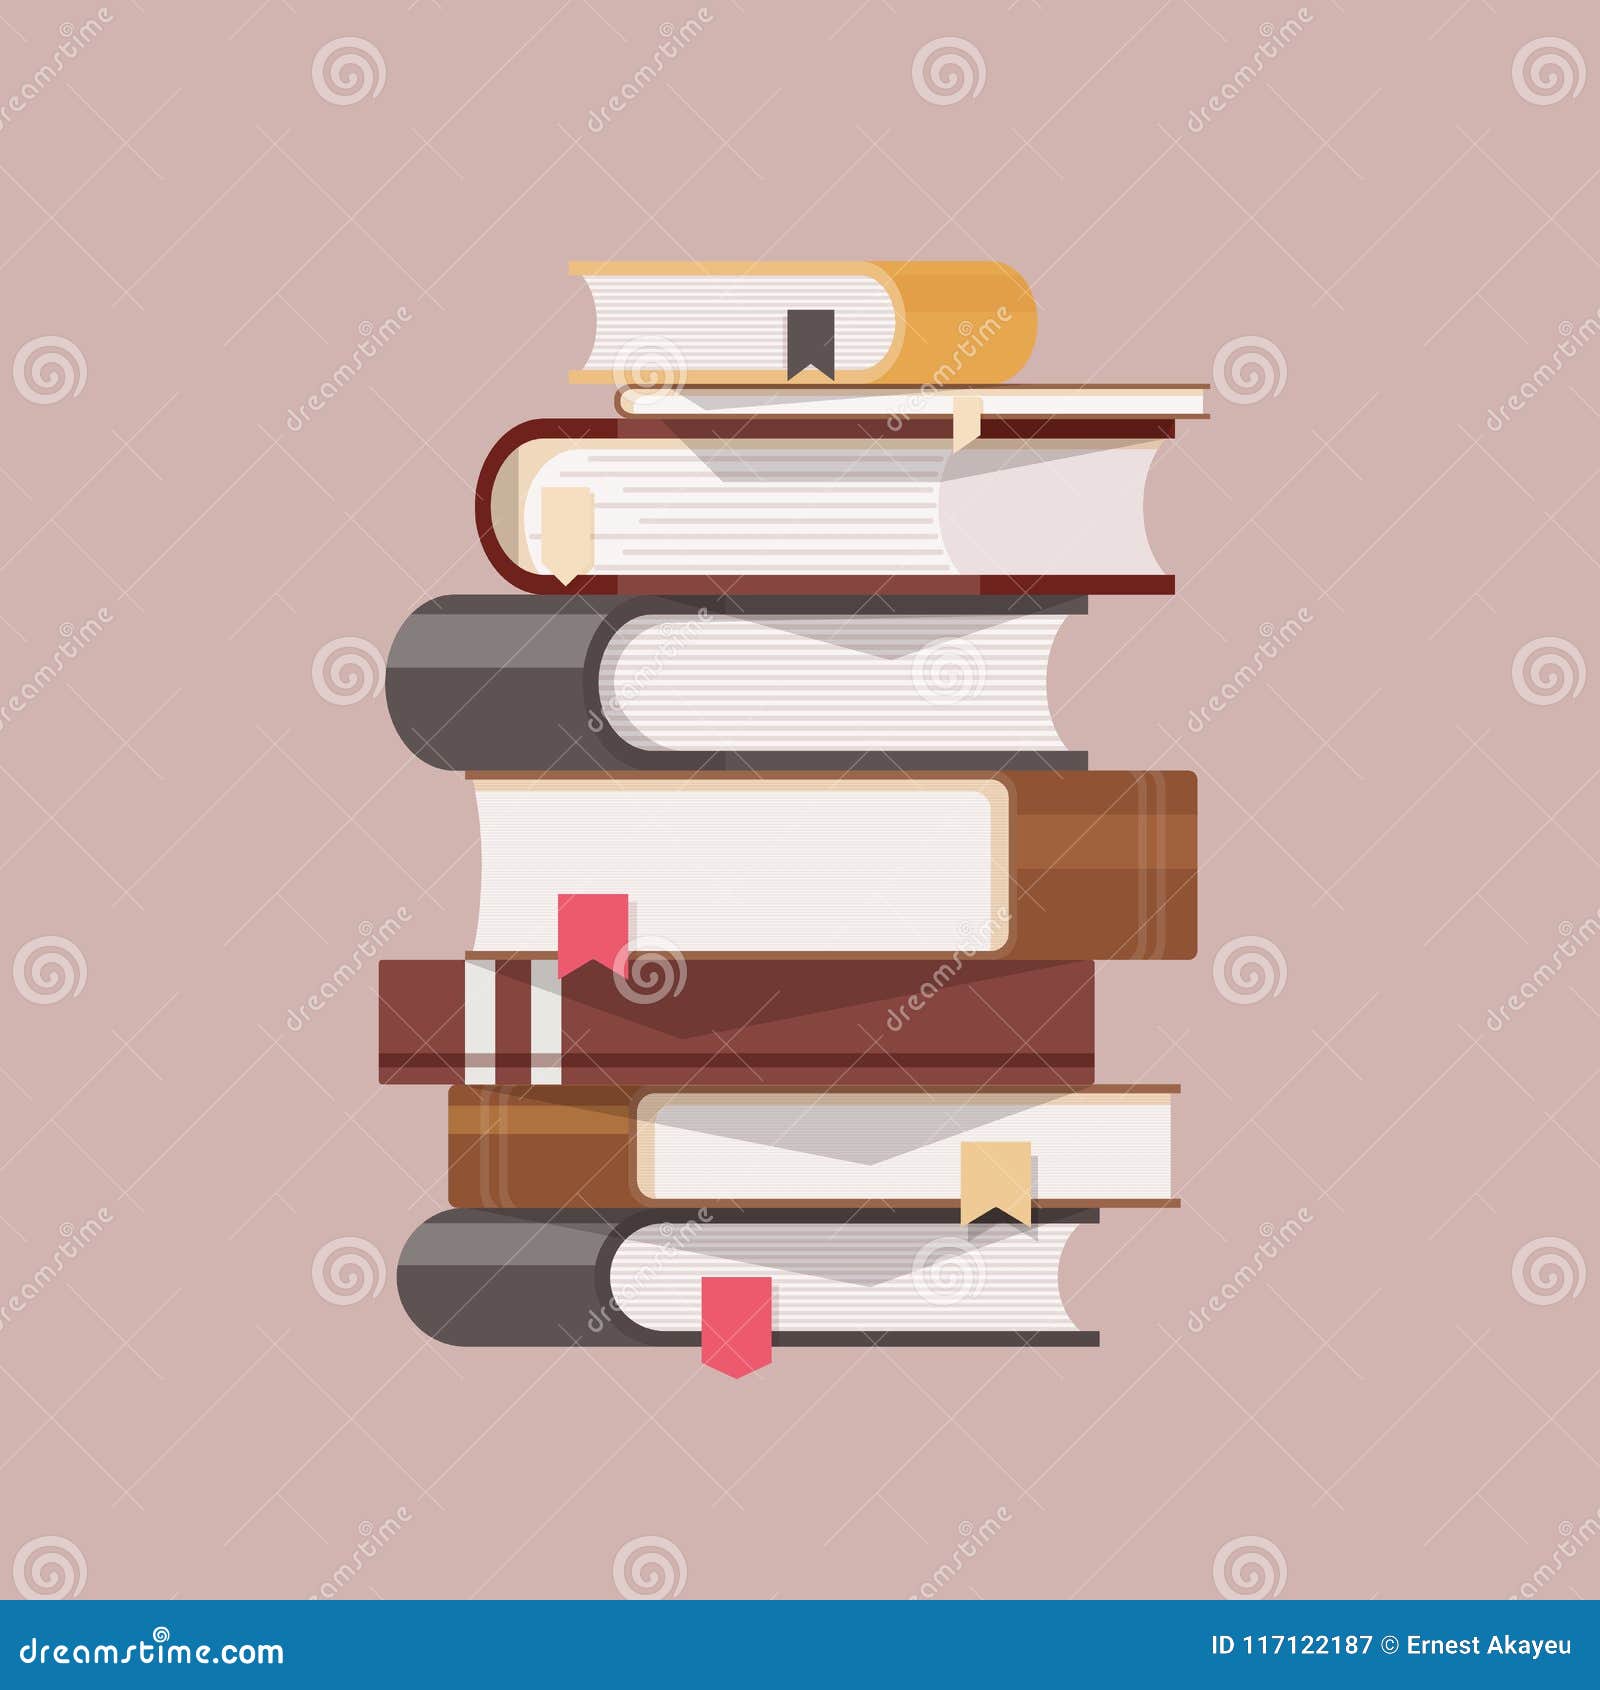 stack of antique books with hardcovers and bookmarks  on light background. pile of literary works with colorful